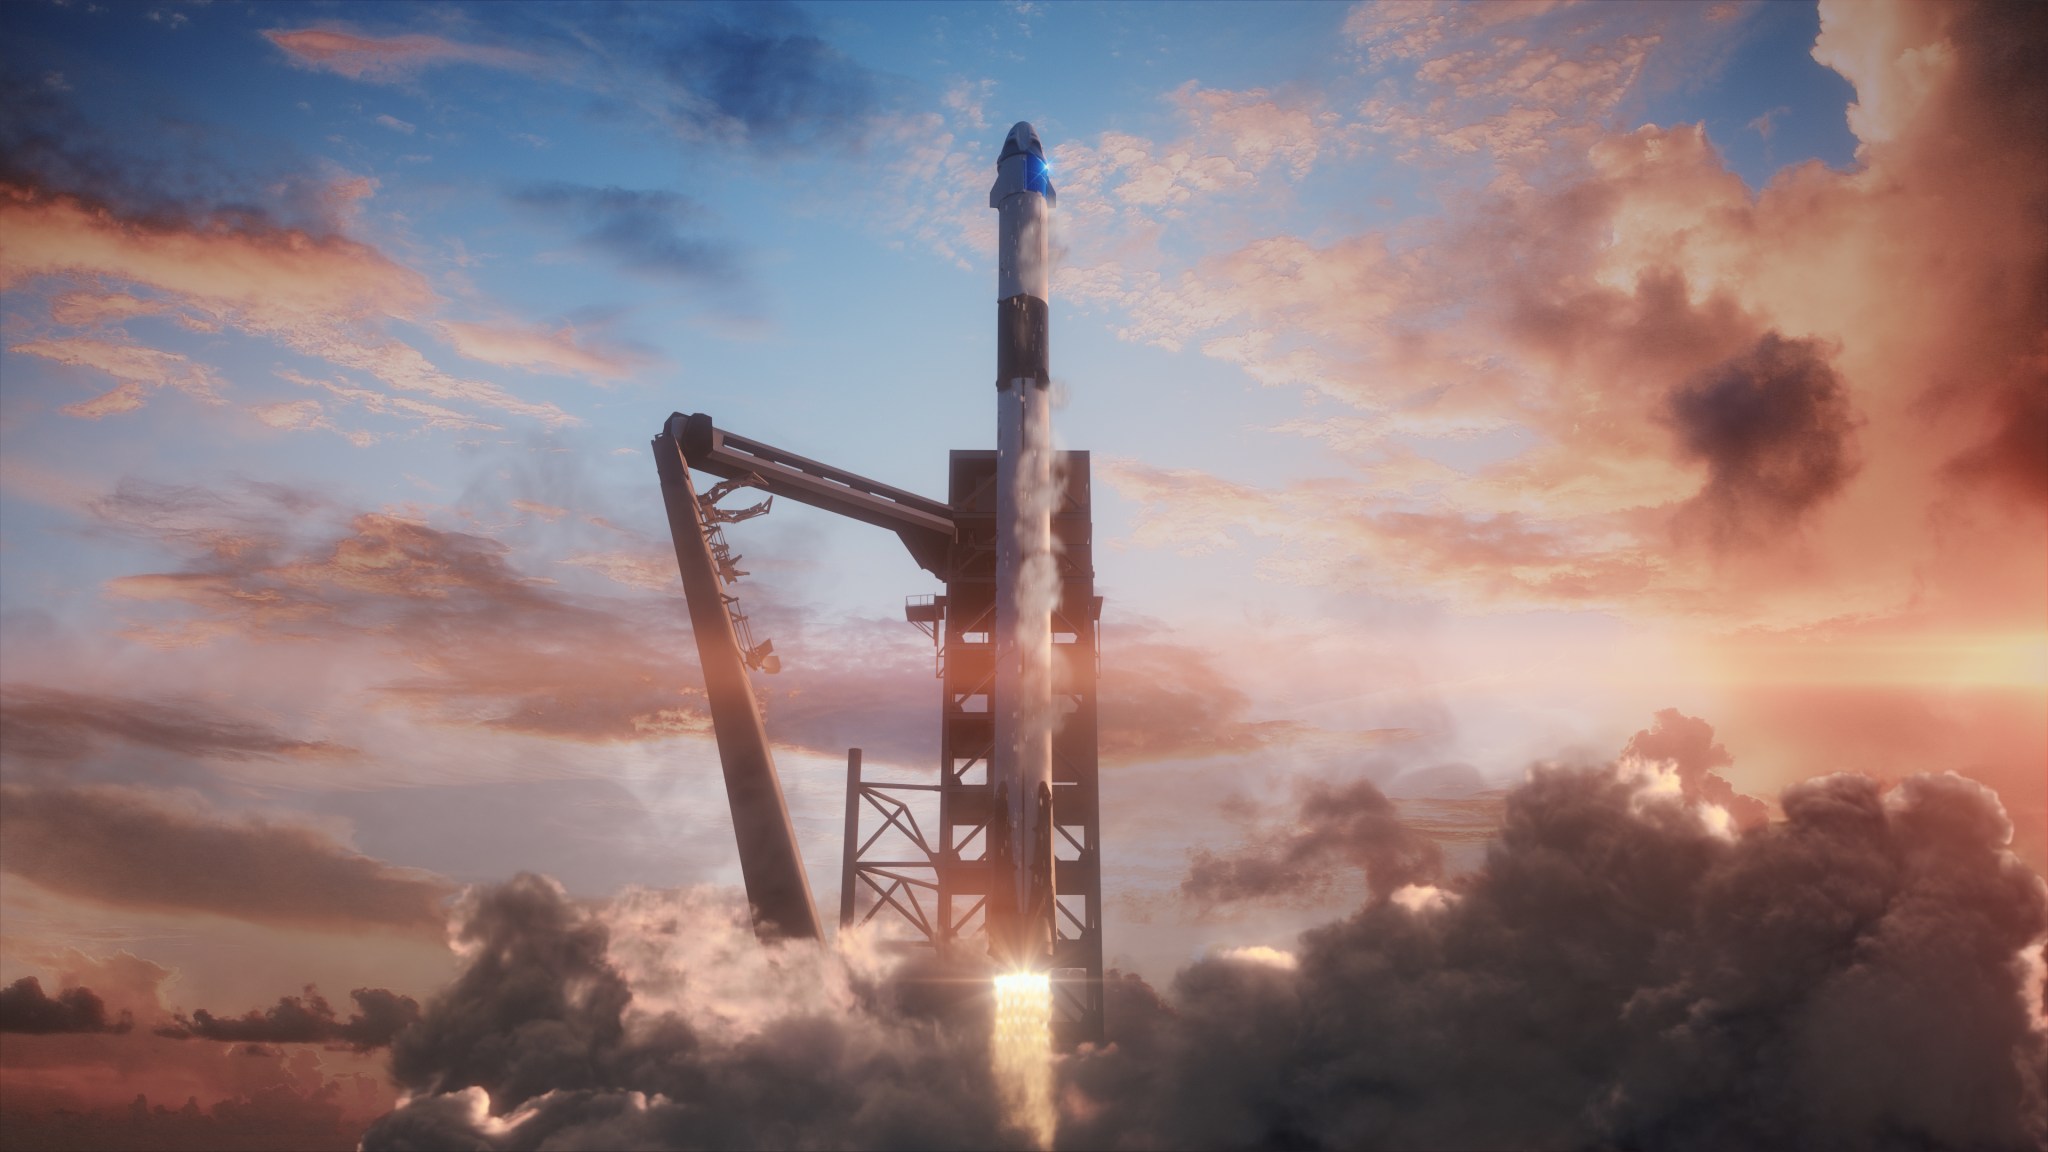 Illustration of SpaceX’s Crew Dragon spacecraft launching atop the company’s Falcon 9 rocket